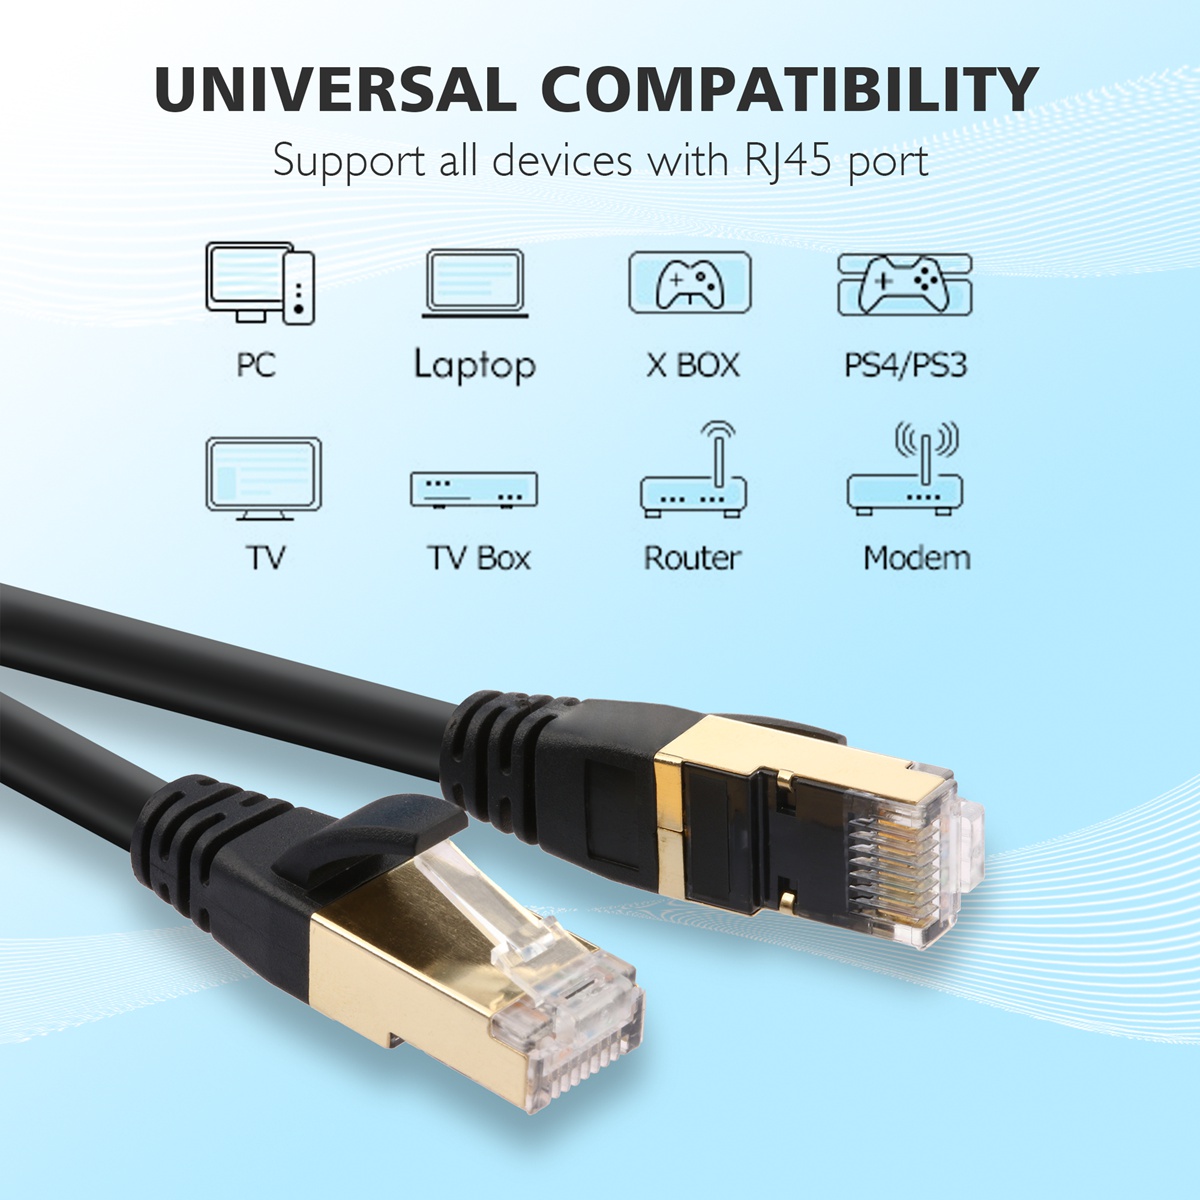 TERABYTE LAN Cable 100 m Genuine High Speed RJ45 cat6 Ethernet Cable LAN  Cable Bundle Internet Network Computer Cable Cord High Speed Gigabit  Category Wires for Modem, Router, LAN ADSL (100M) 